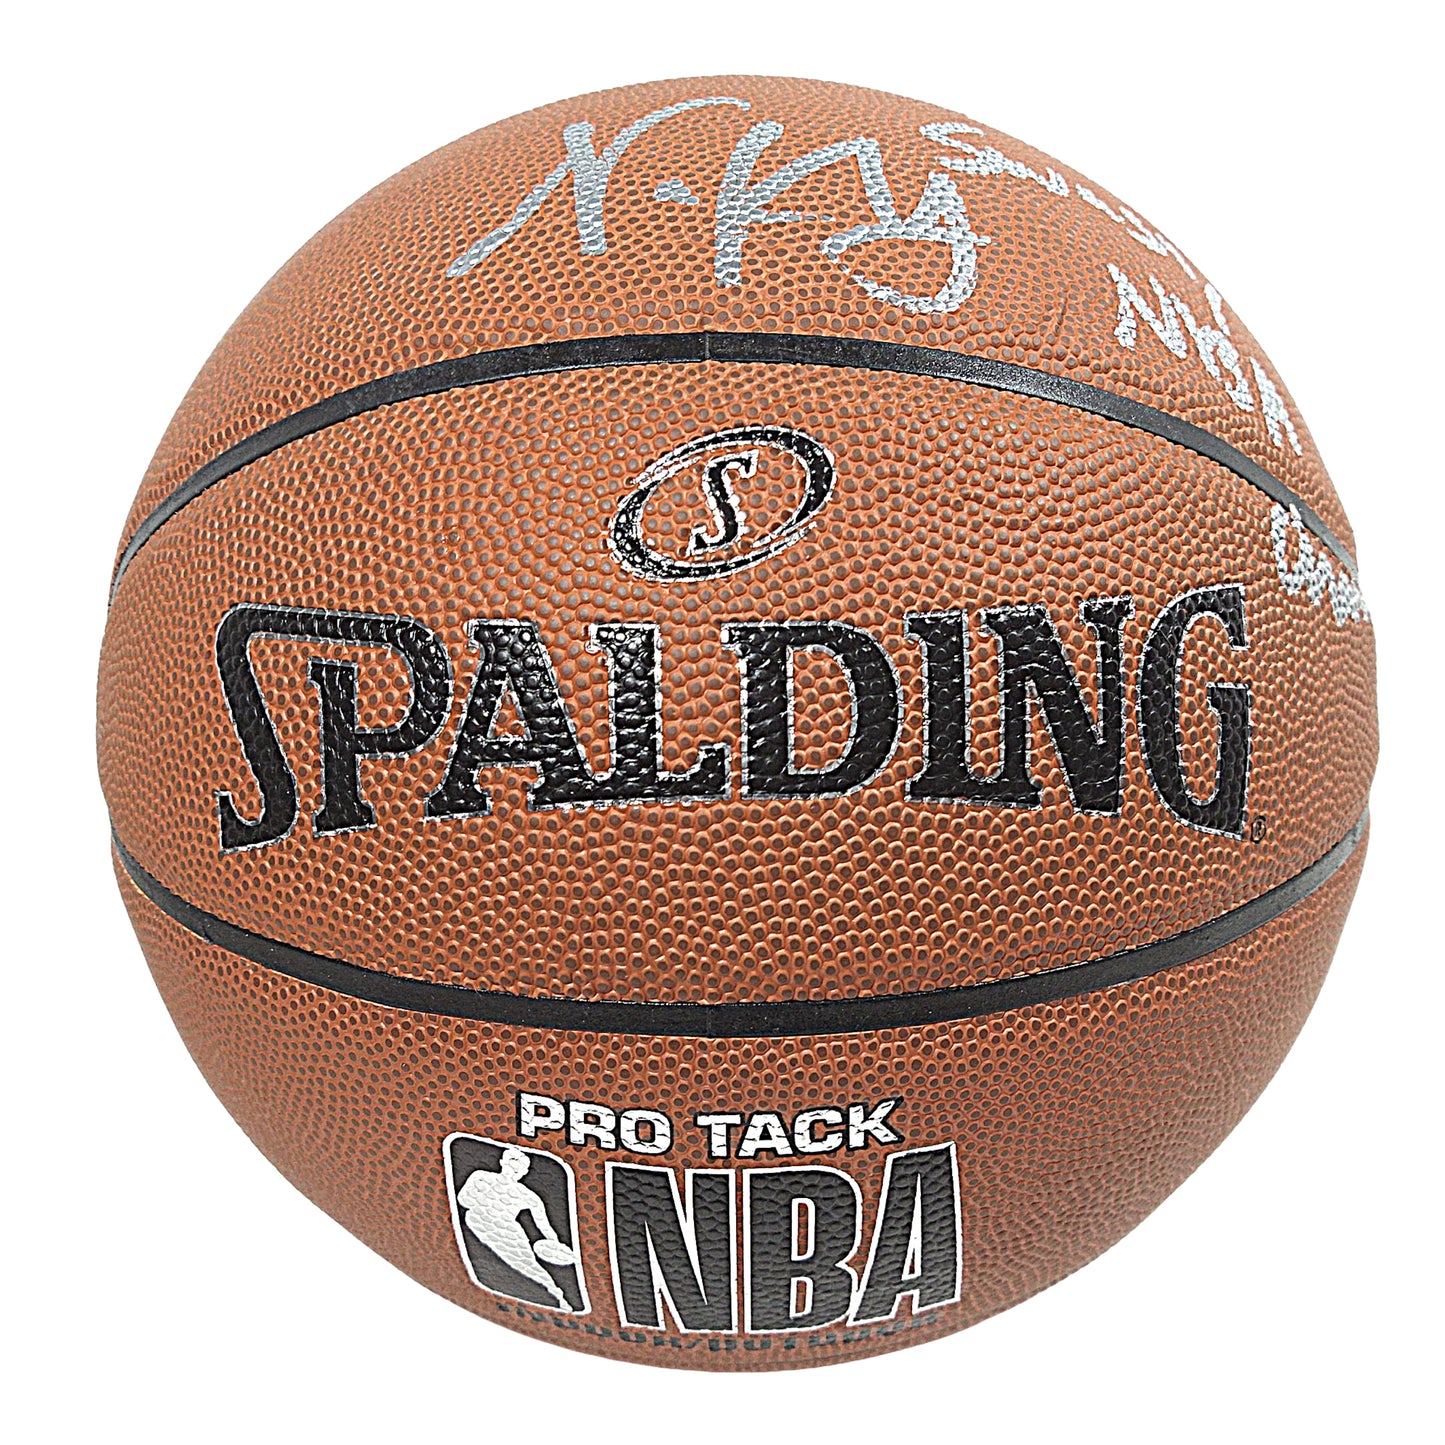 Basketballs- Autographed- Nick Young Signed NBA Basketball with NBA Champs Inscription - Golden State Warriors - USC Trojans - Exact Proof - Beckett BAS Authentication 105